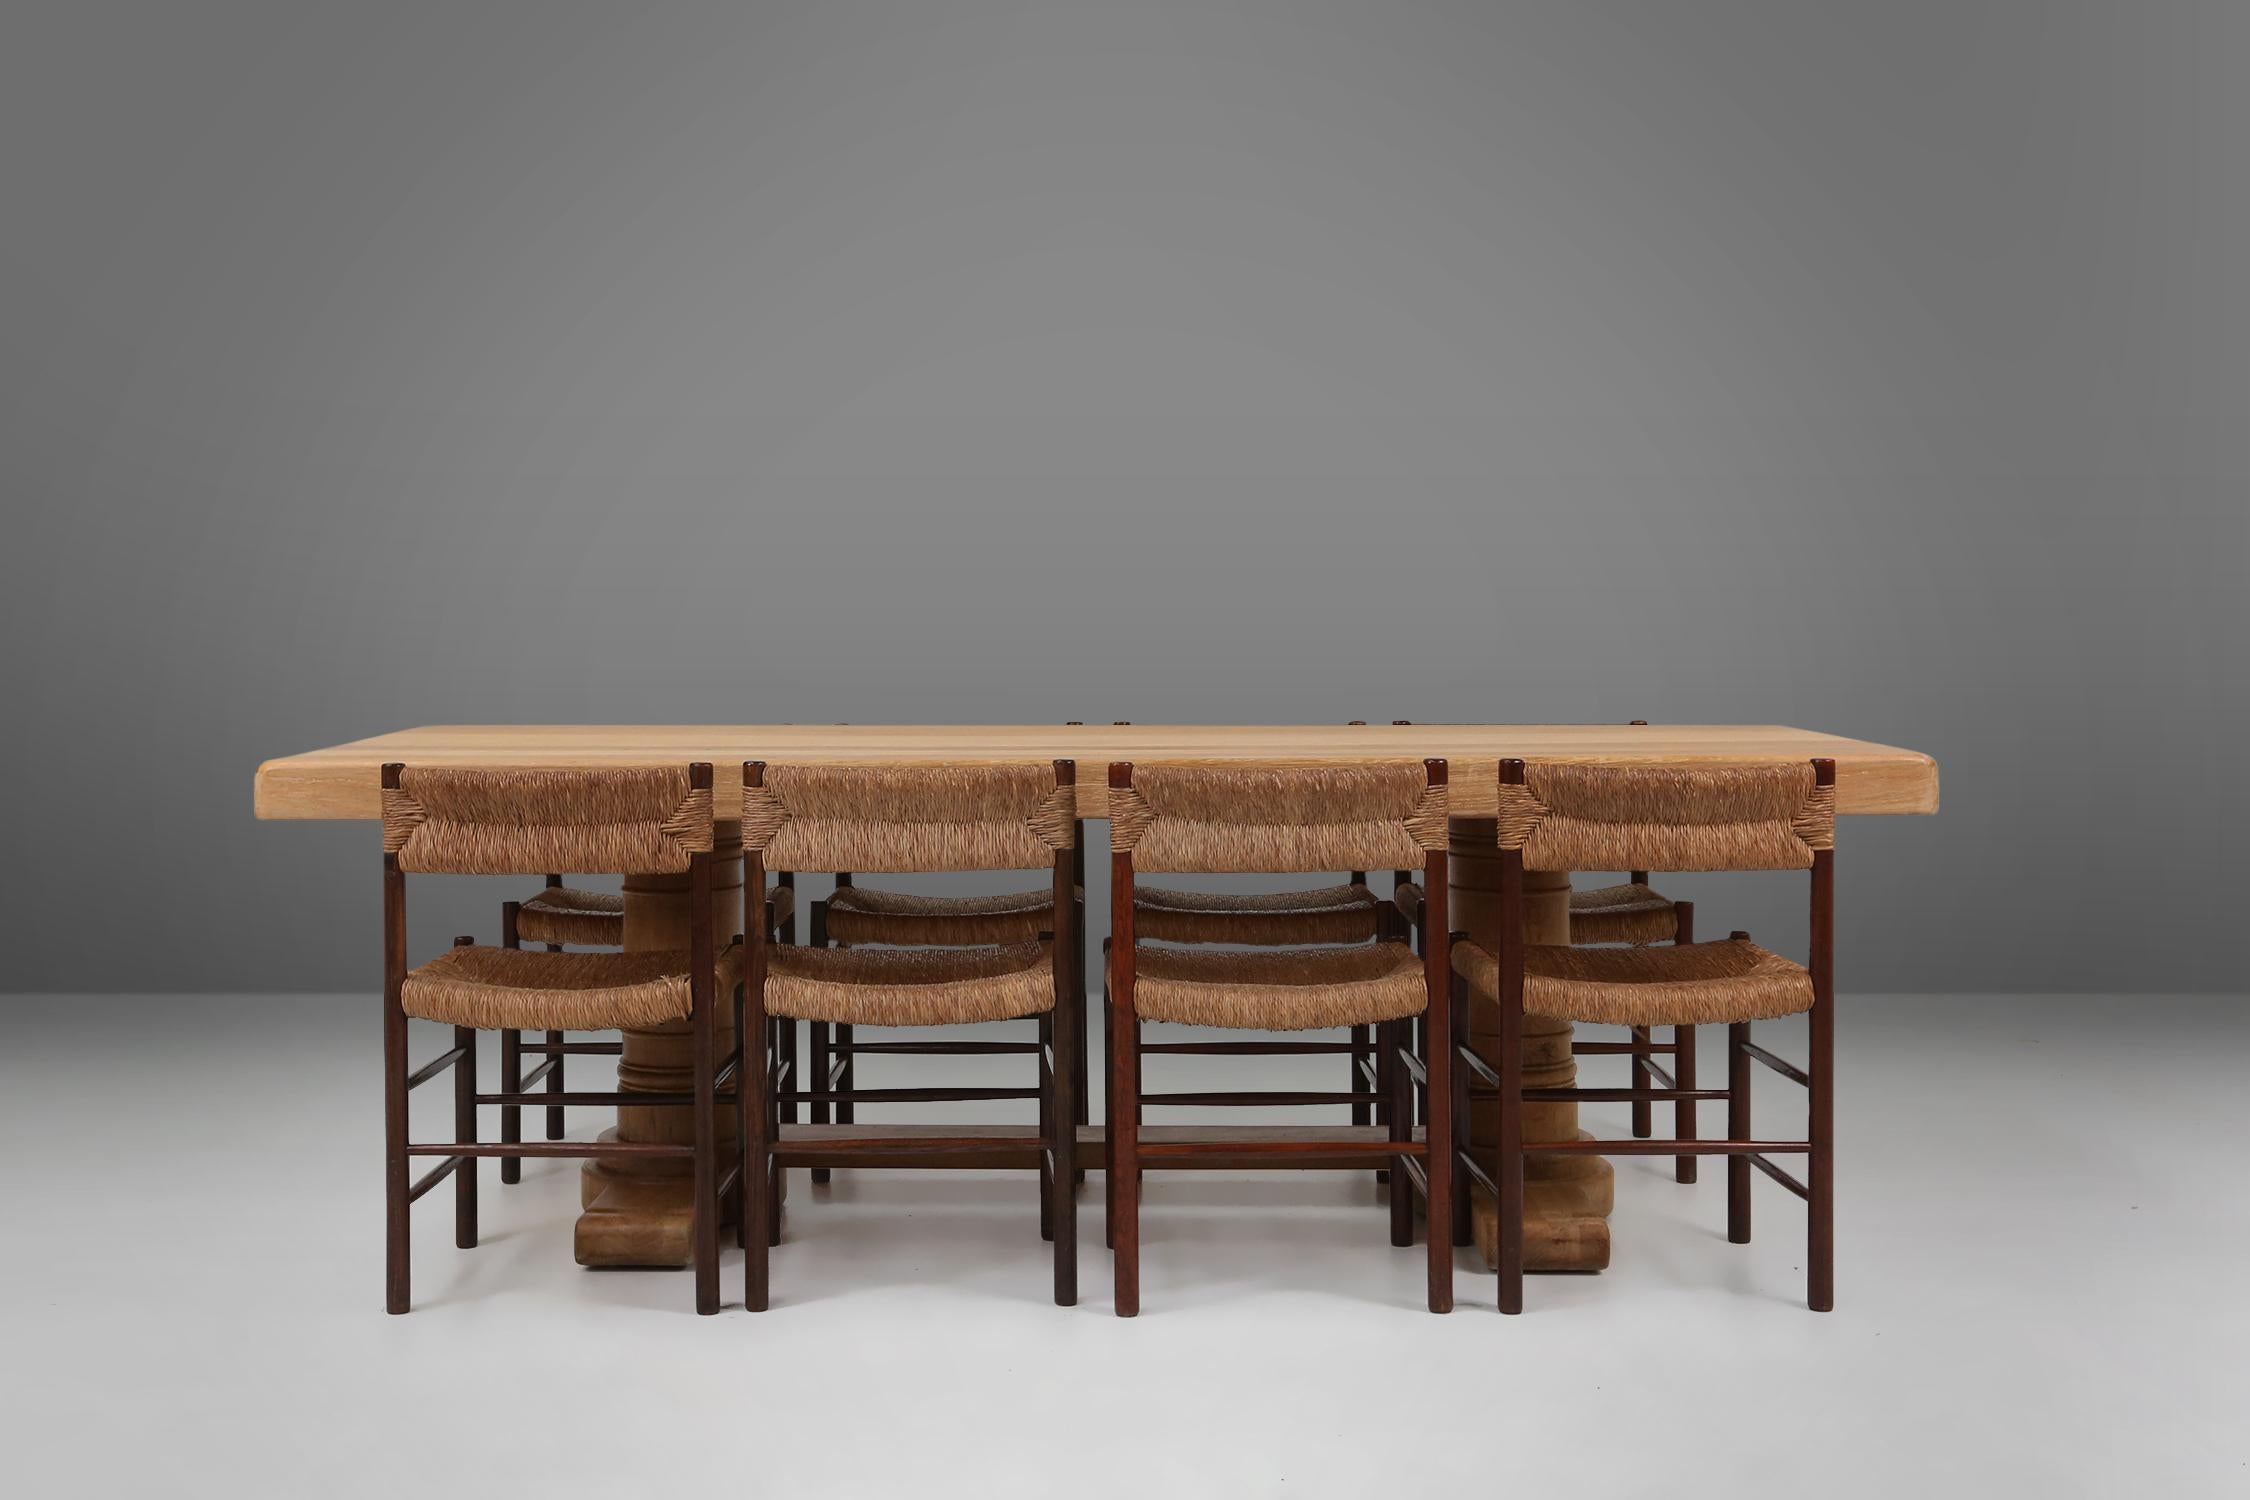 France / 1950s / table / oak wood / mid-century / rustic

A stunning French mid-century dining table in blond oak, designed in the fifties. Its impressive sculptured base and robust thick top make this piece an artistic statement of design. This